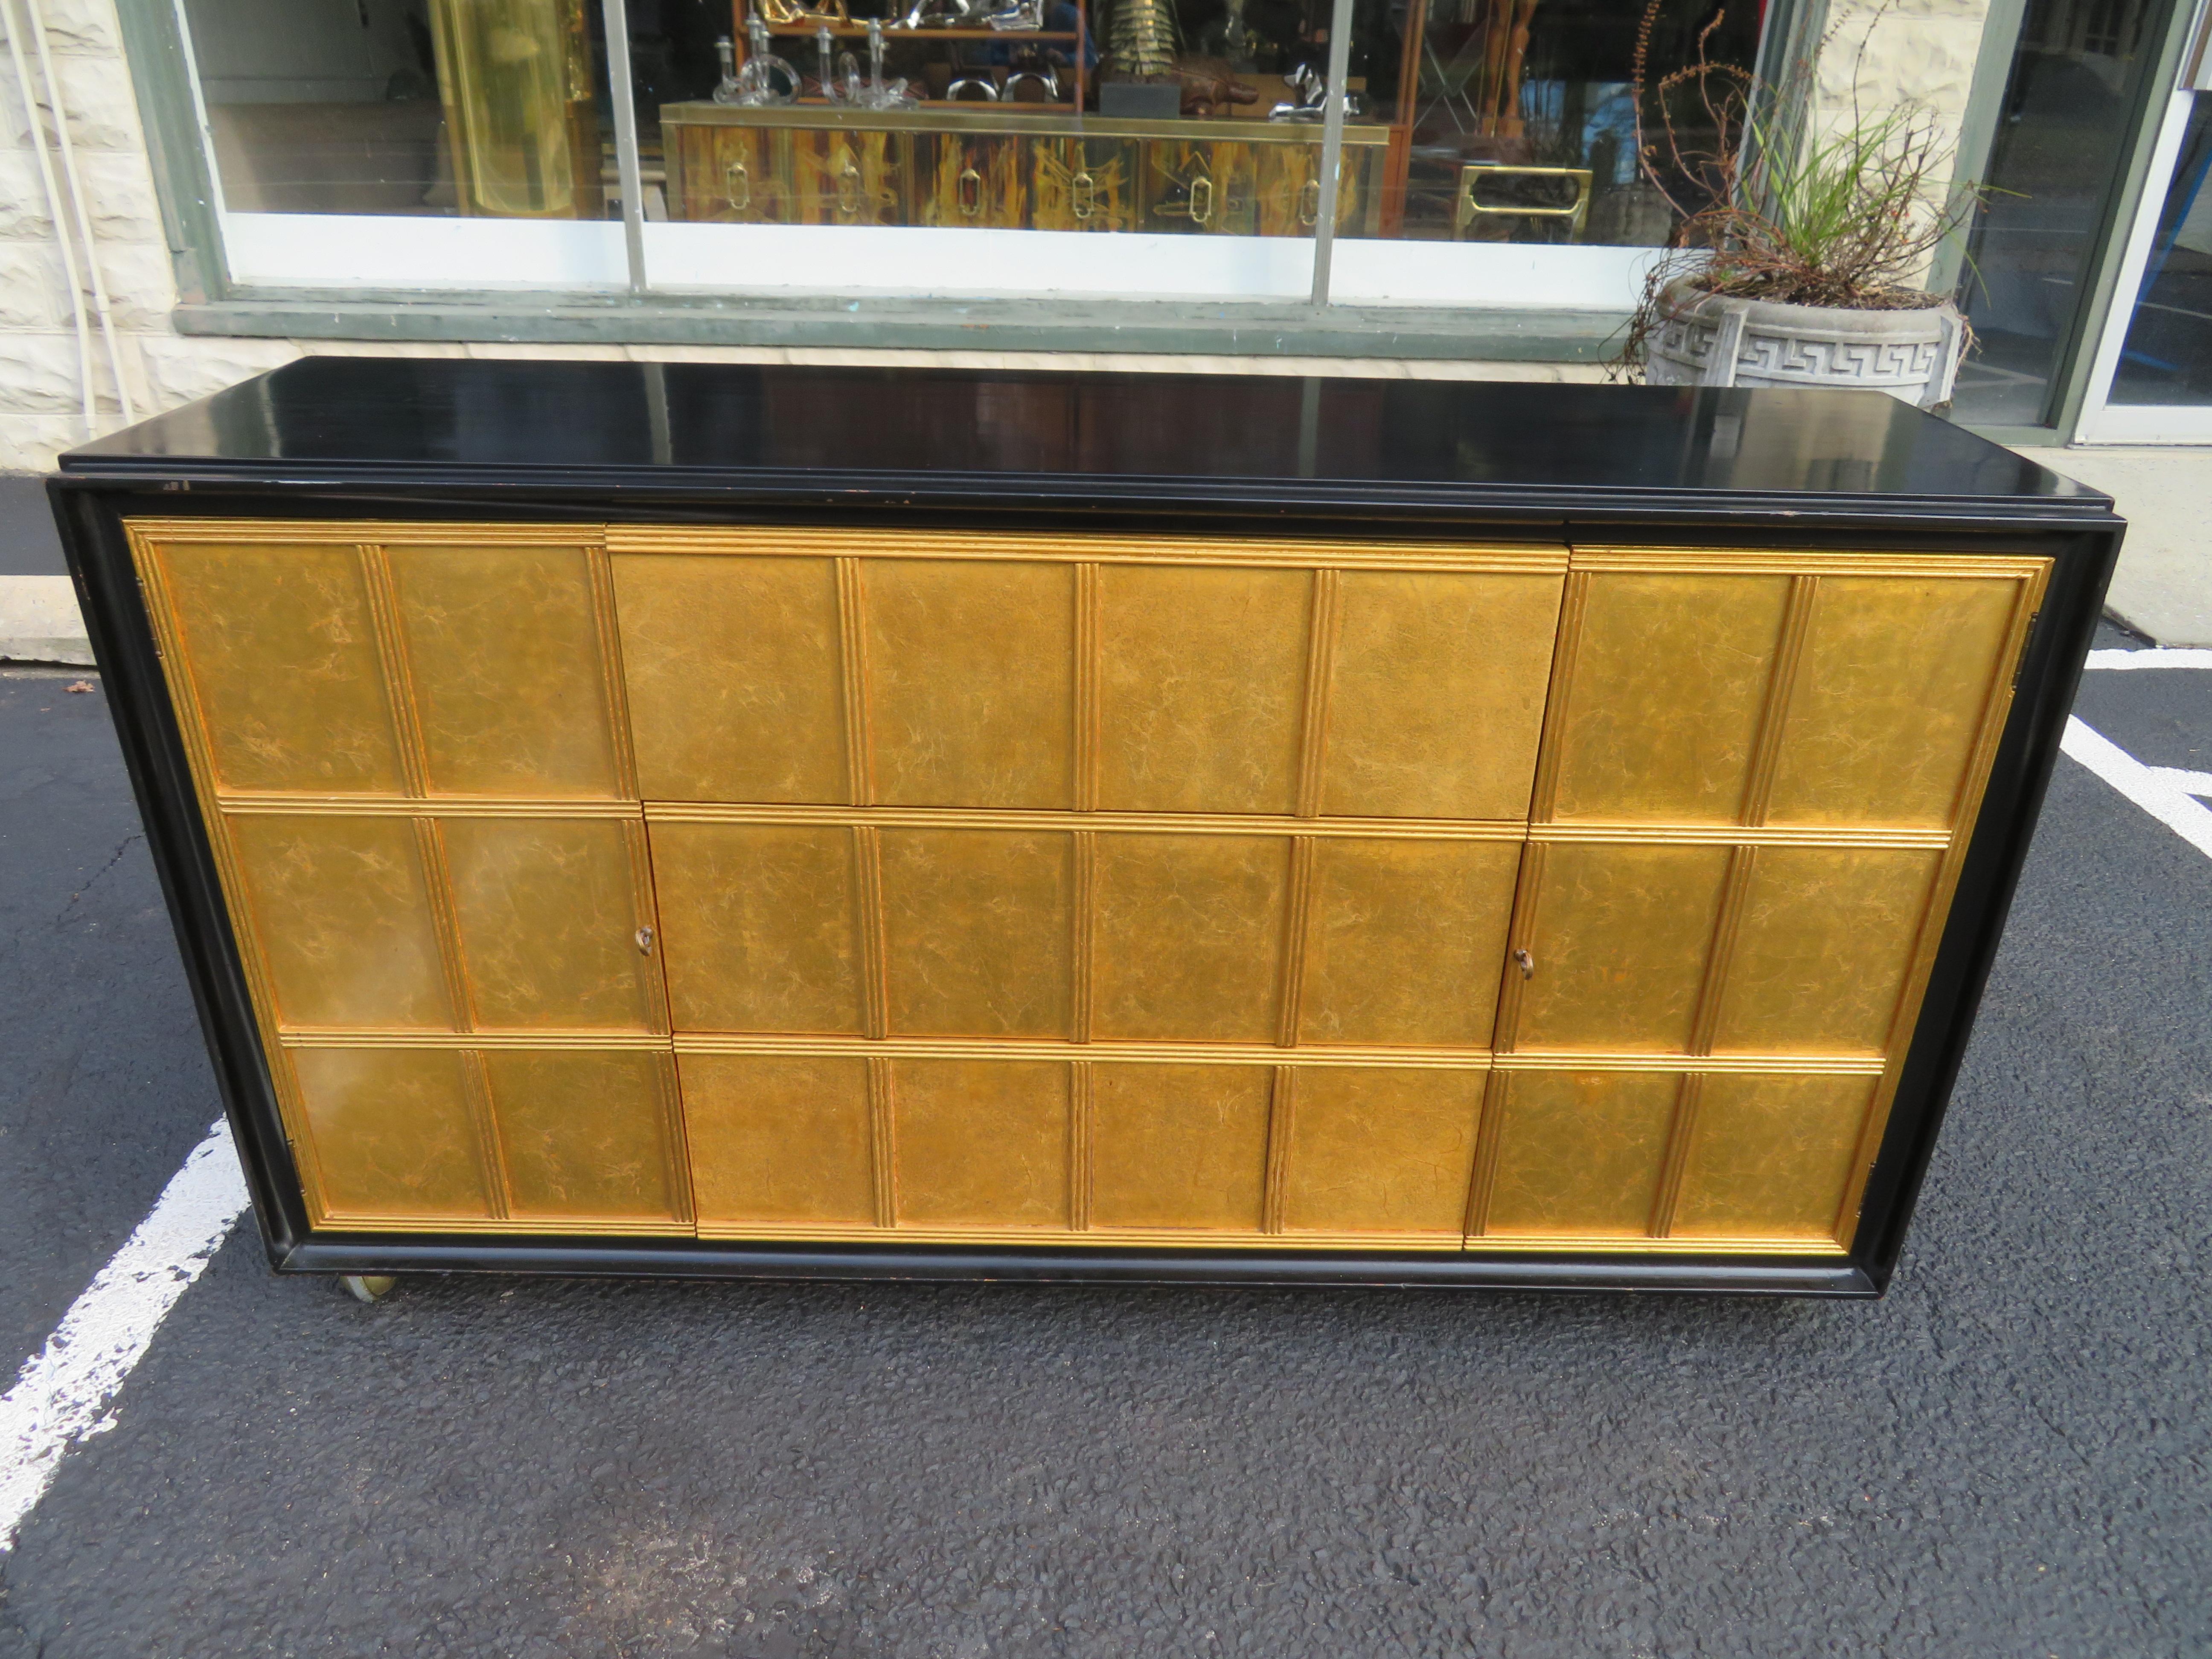 Lovely Dorothy Draper style gold leaf front rolling buffet credenza. We love the gold leafed front lattice style doors and drawers. There are drawers down the middle with two doors on either side-one adjustable shelf in each. The top and sides